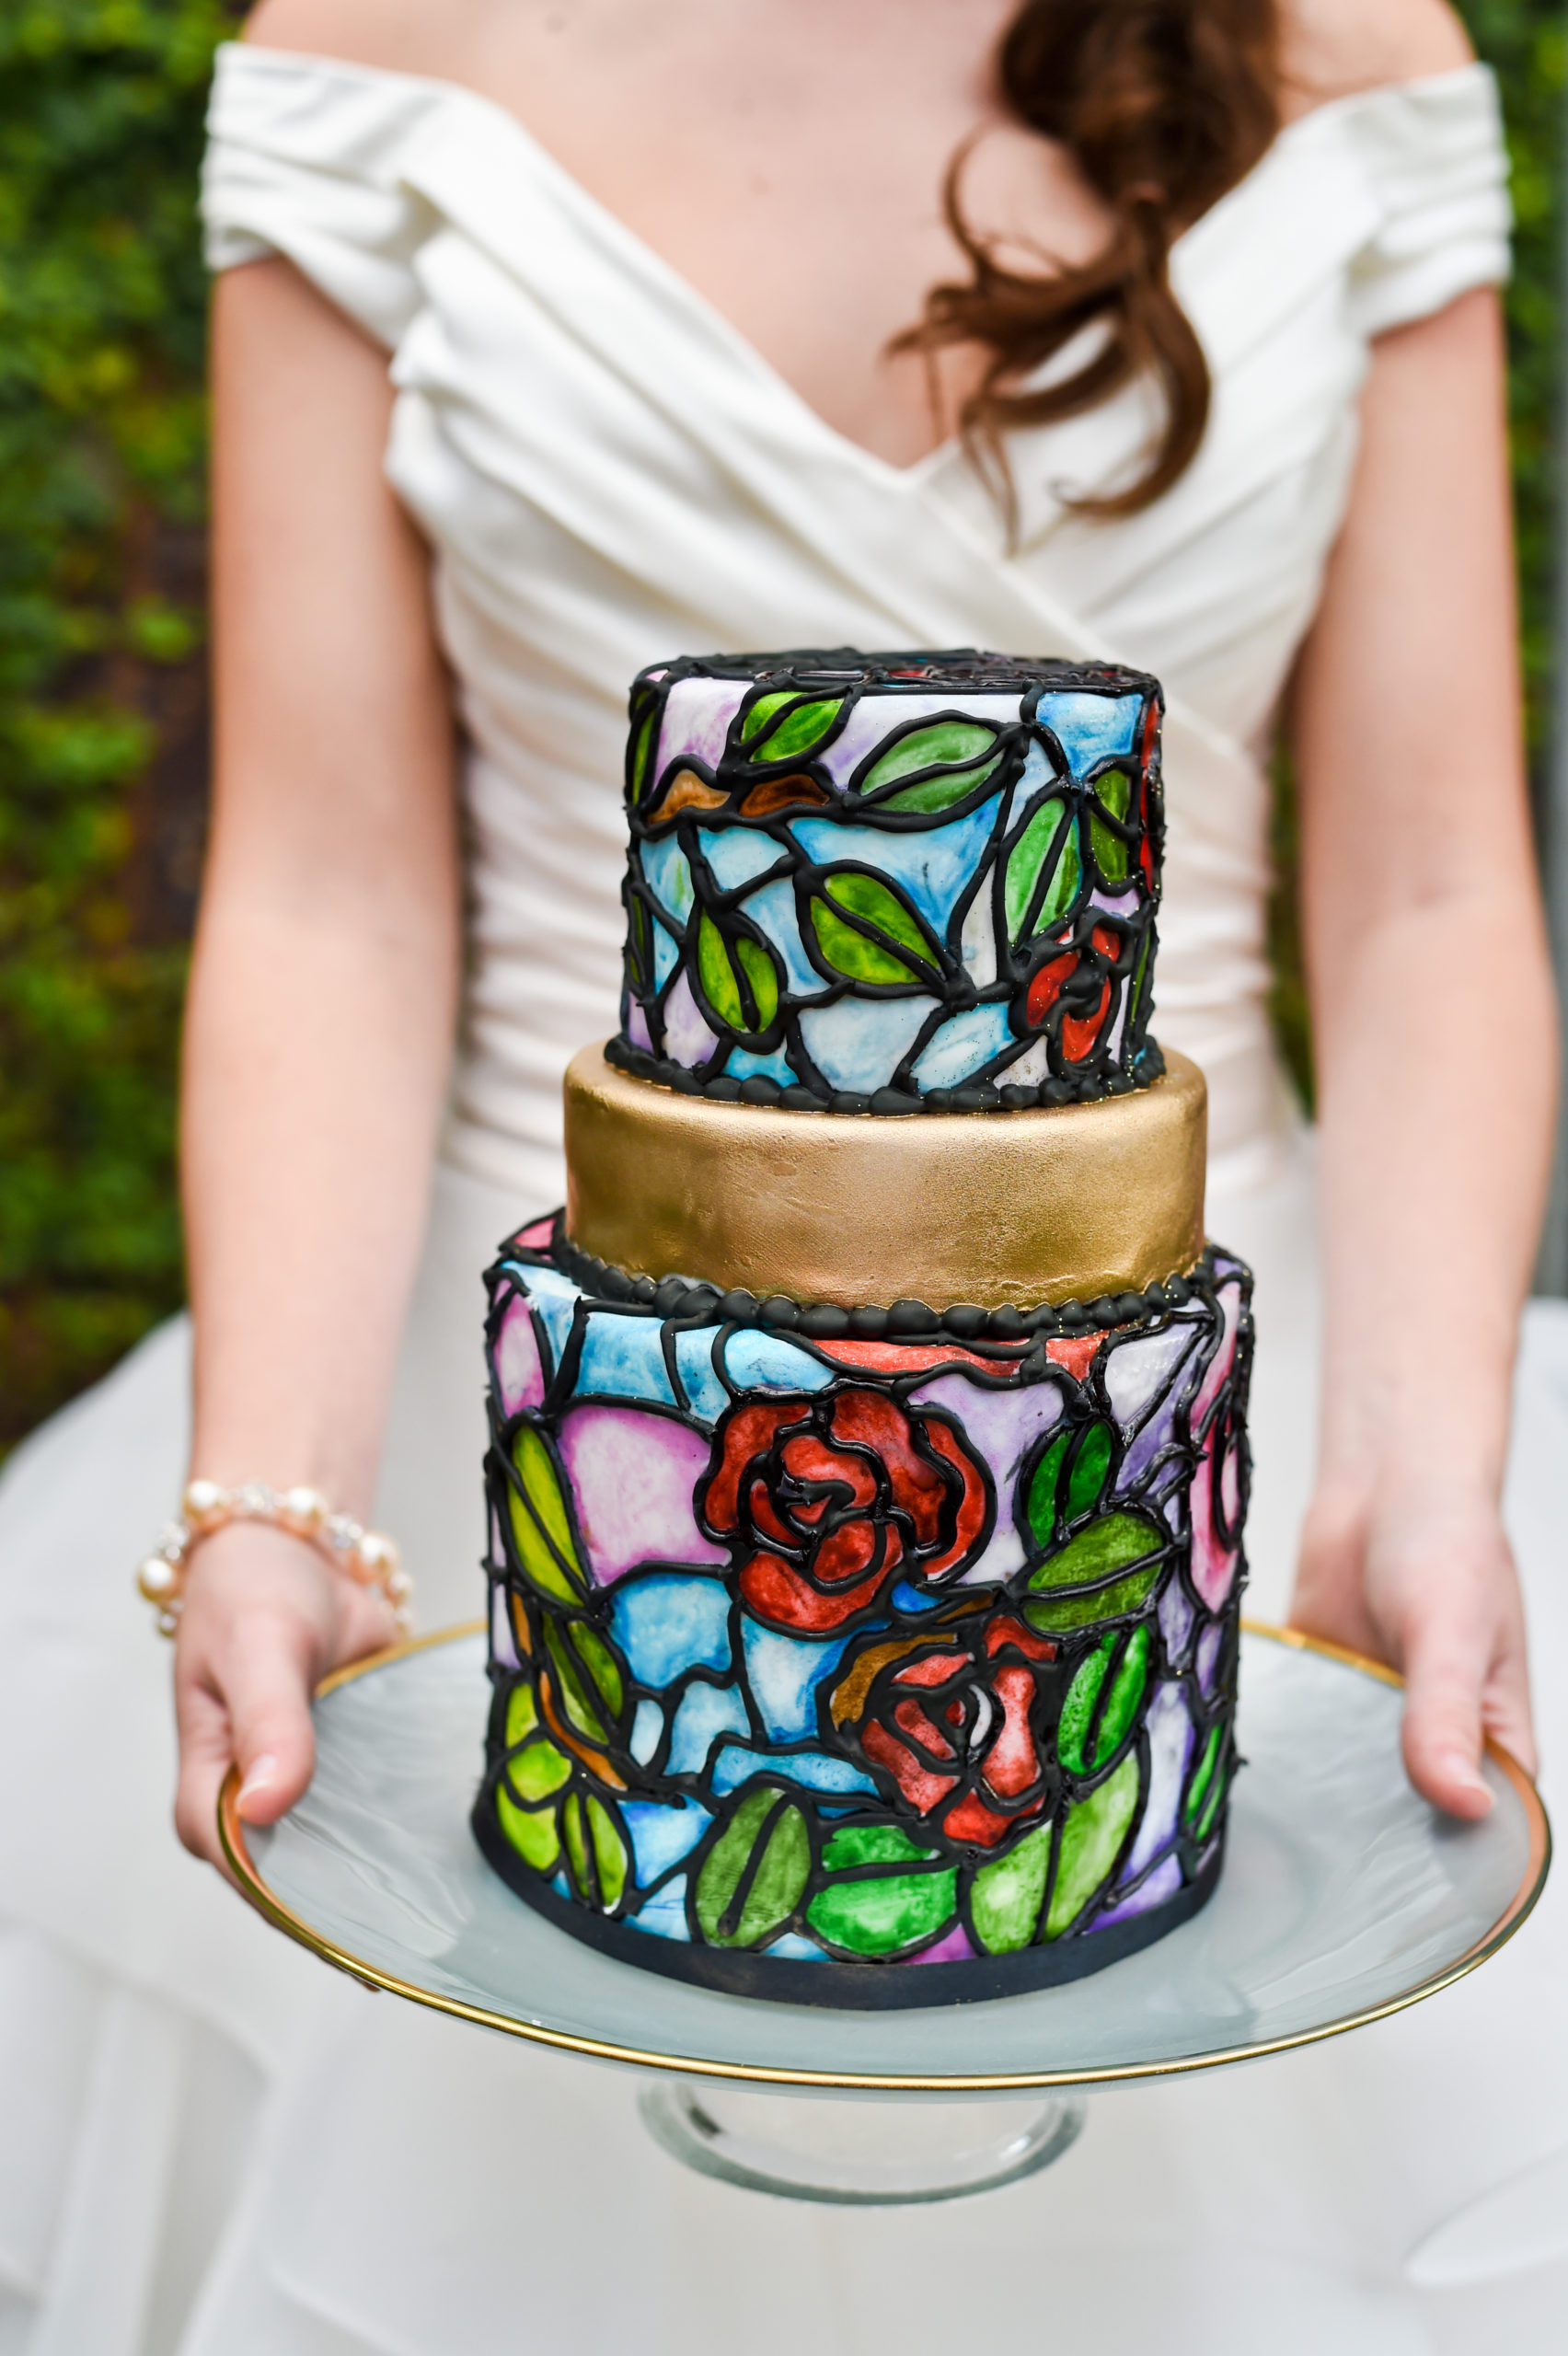 Need Disney wedding ideas for your cake? A stained glass wedding cake or stained glass cake is the perfect way to express your love for Disney in this Beauty and the Beast wedding